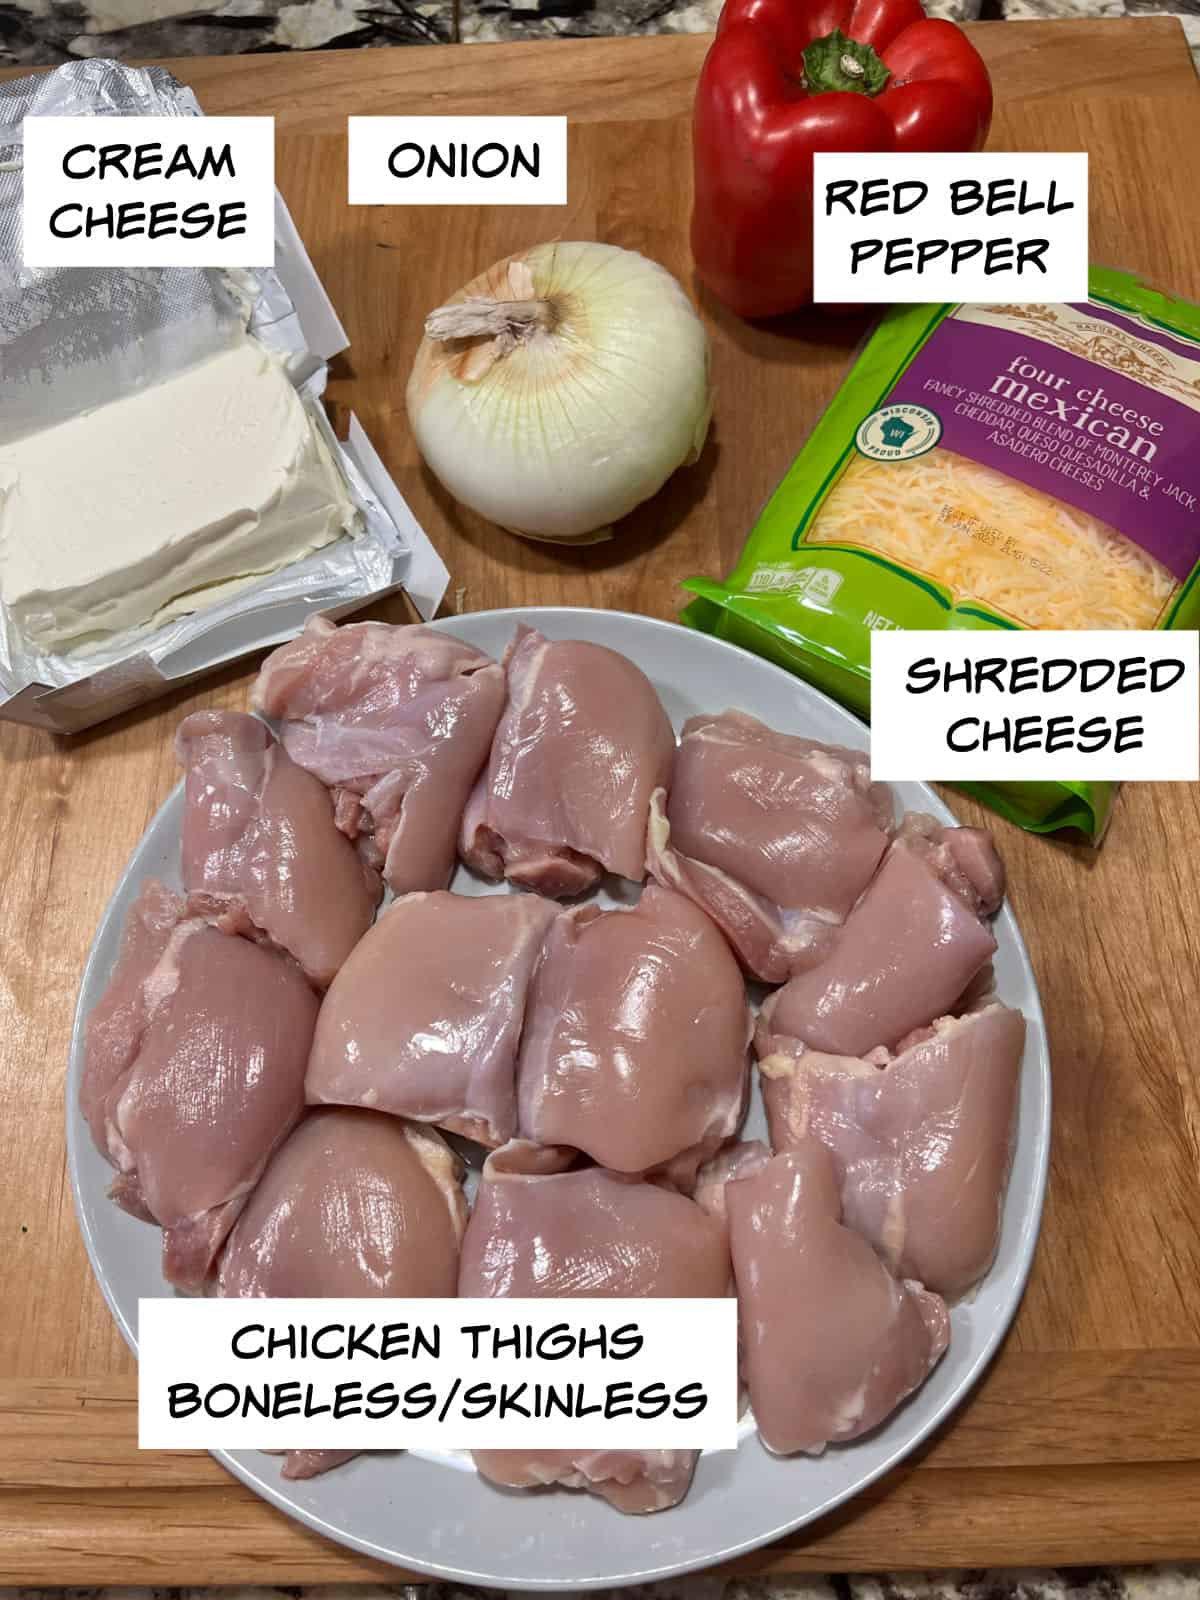 ingredients: chicken thighs, cream cheese, onion, red bell pepper, shredded cheese.